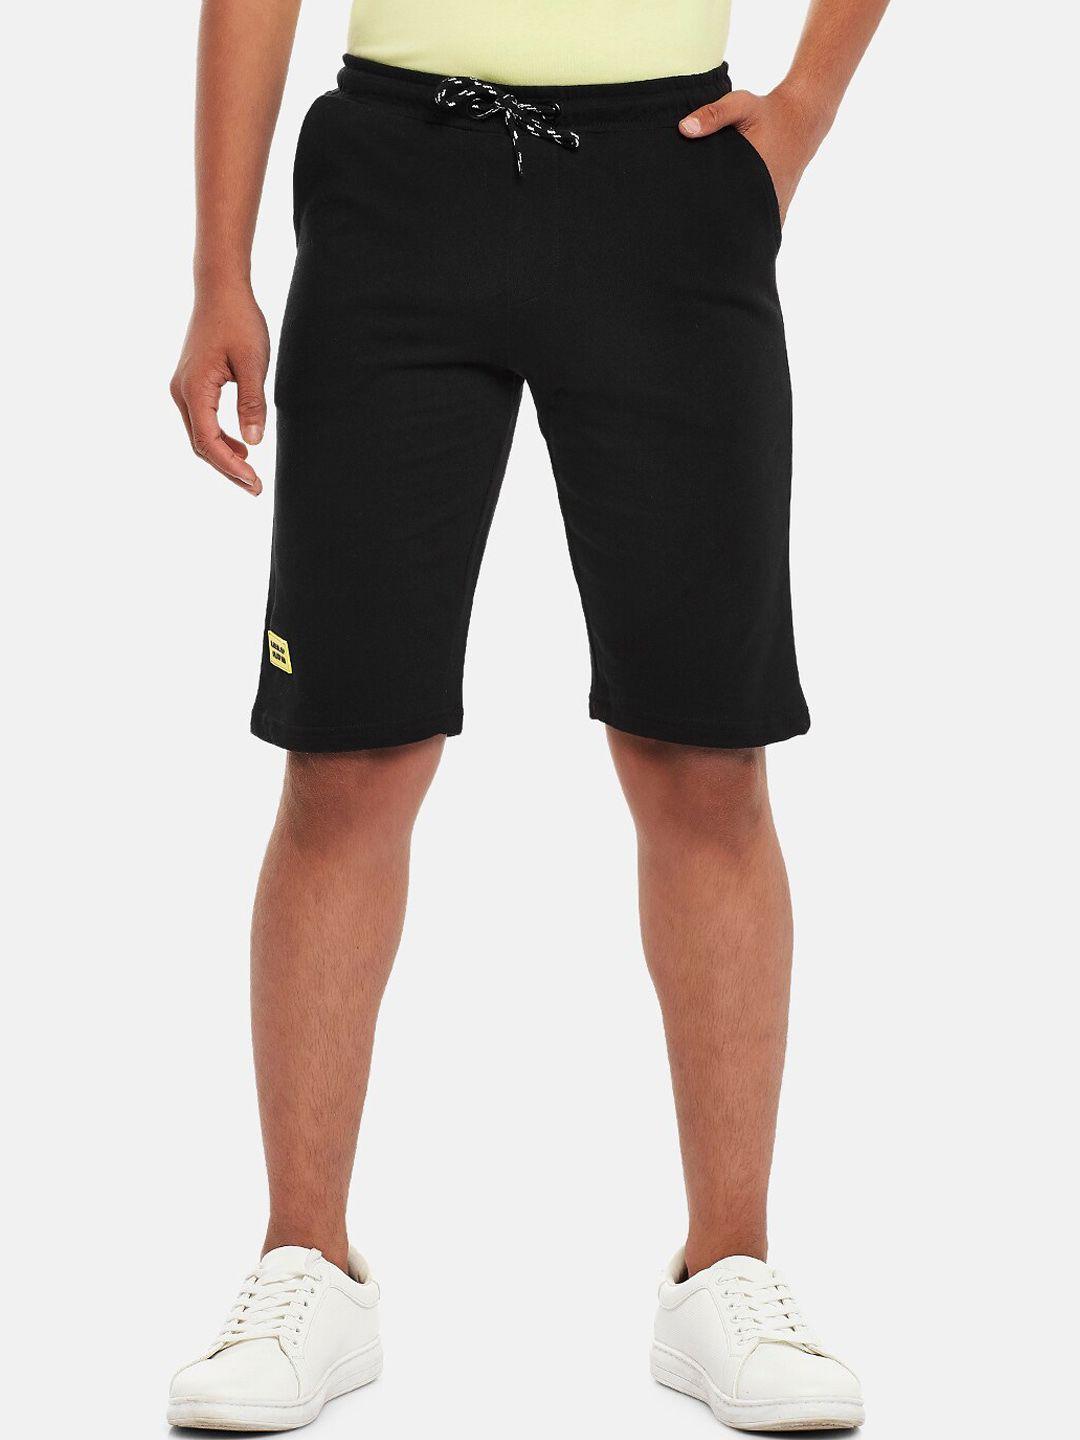 coolsters by pantaloons boys black solid shorts